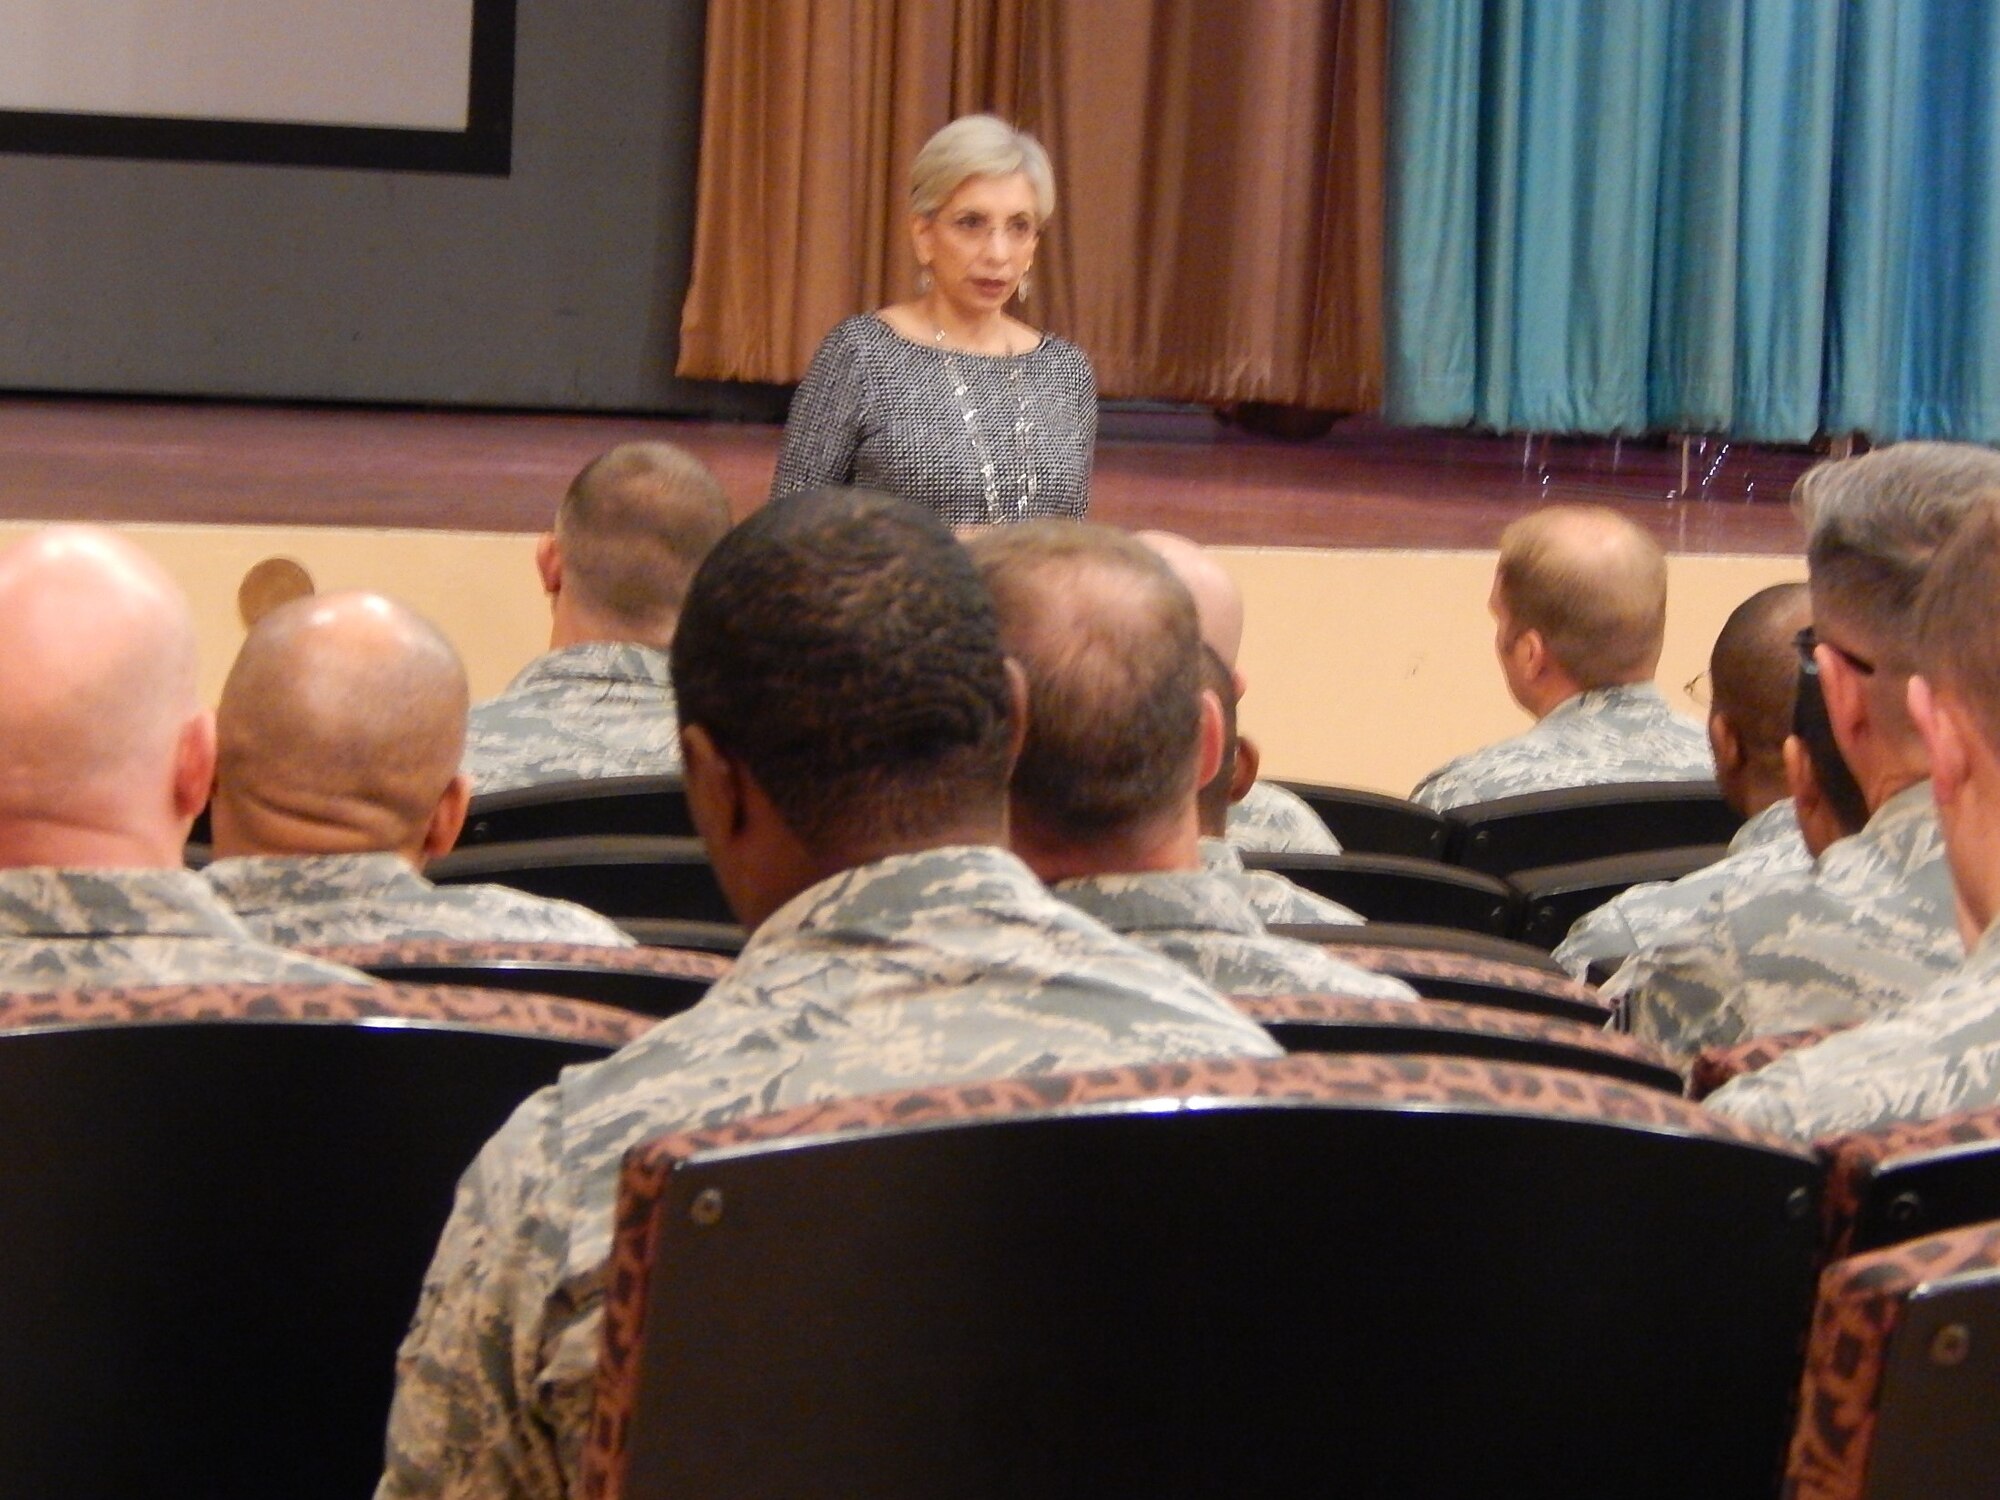 Beale AFB at the base theater was the location for all reservists to take part in listening to Chief Kelly speak on leadership.